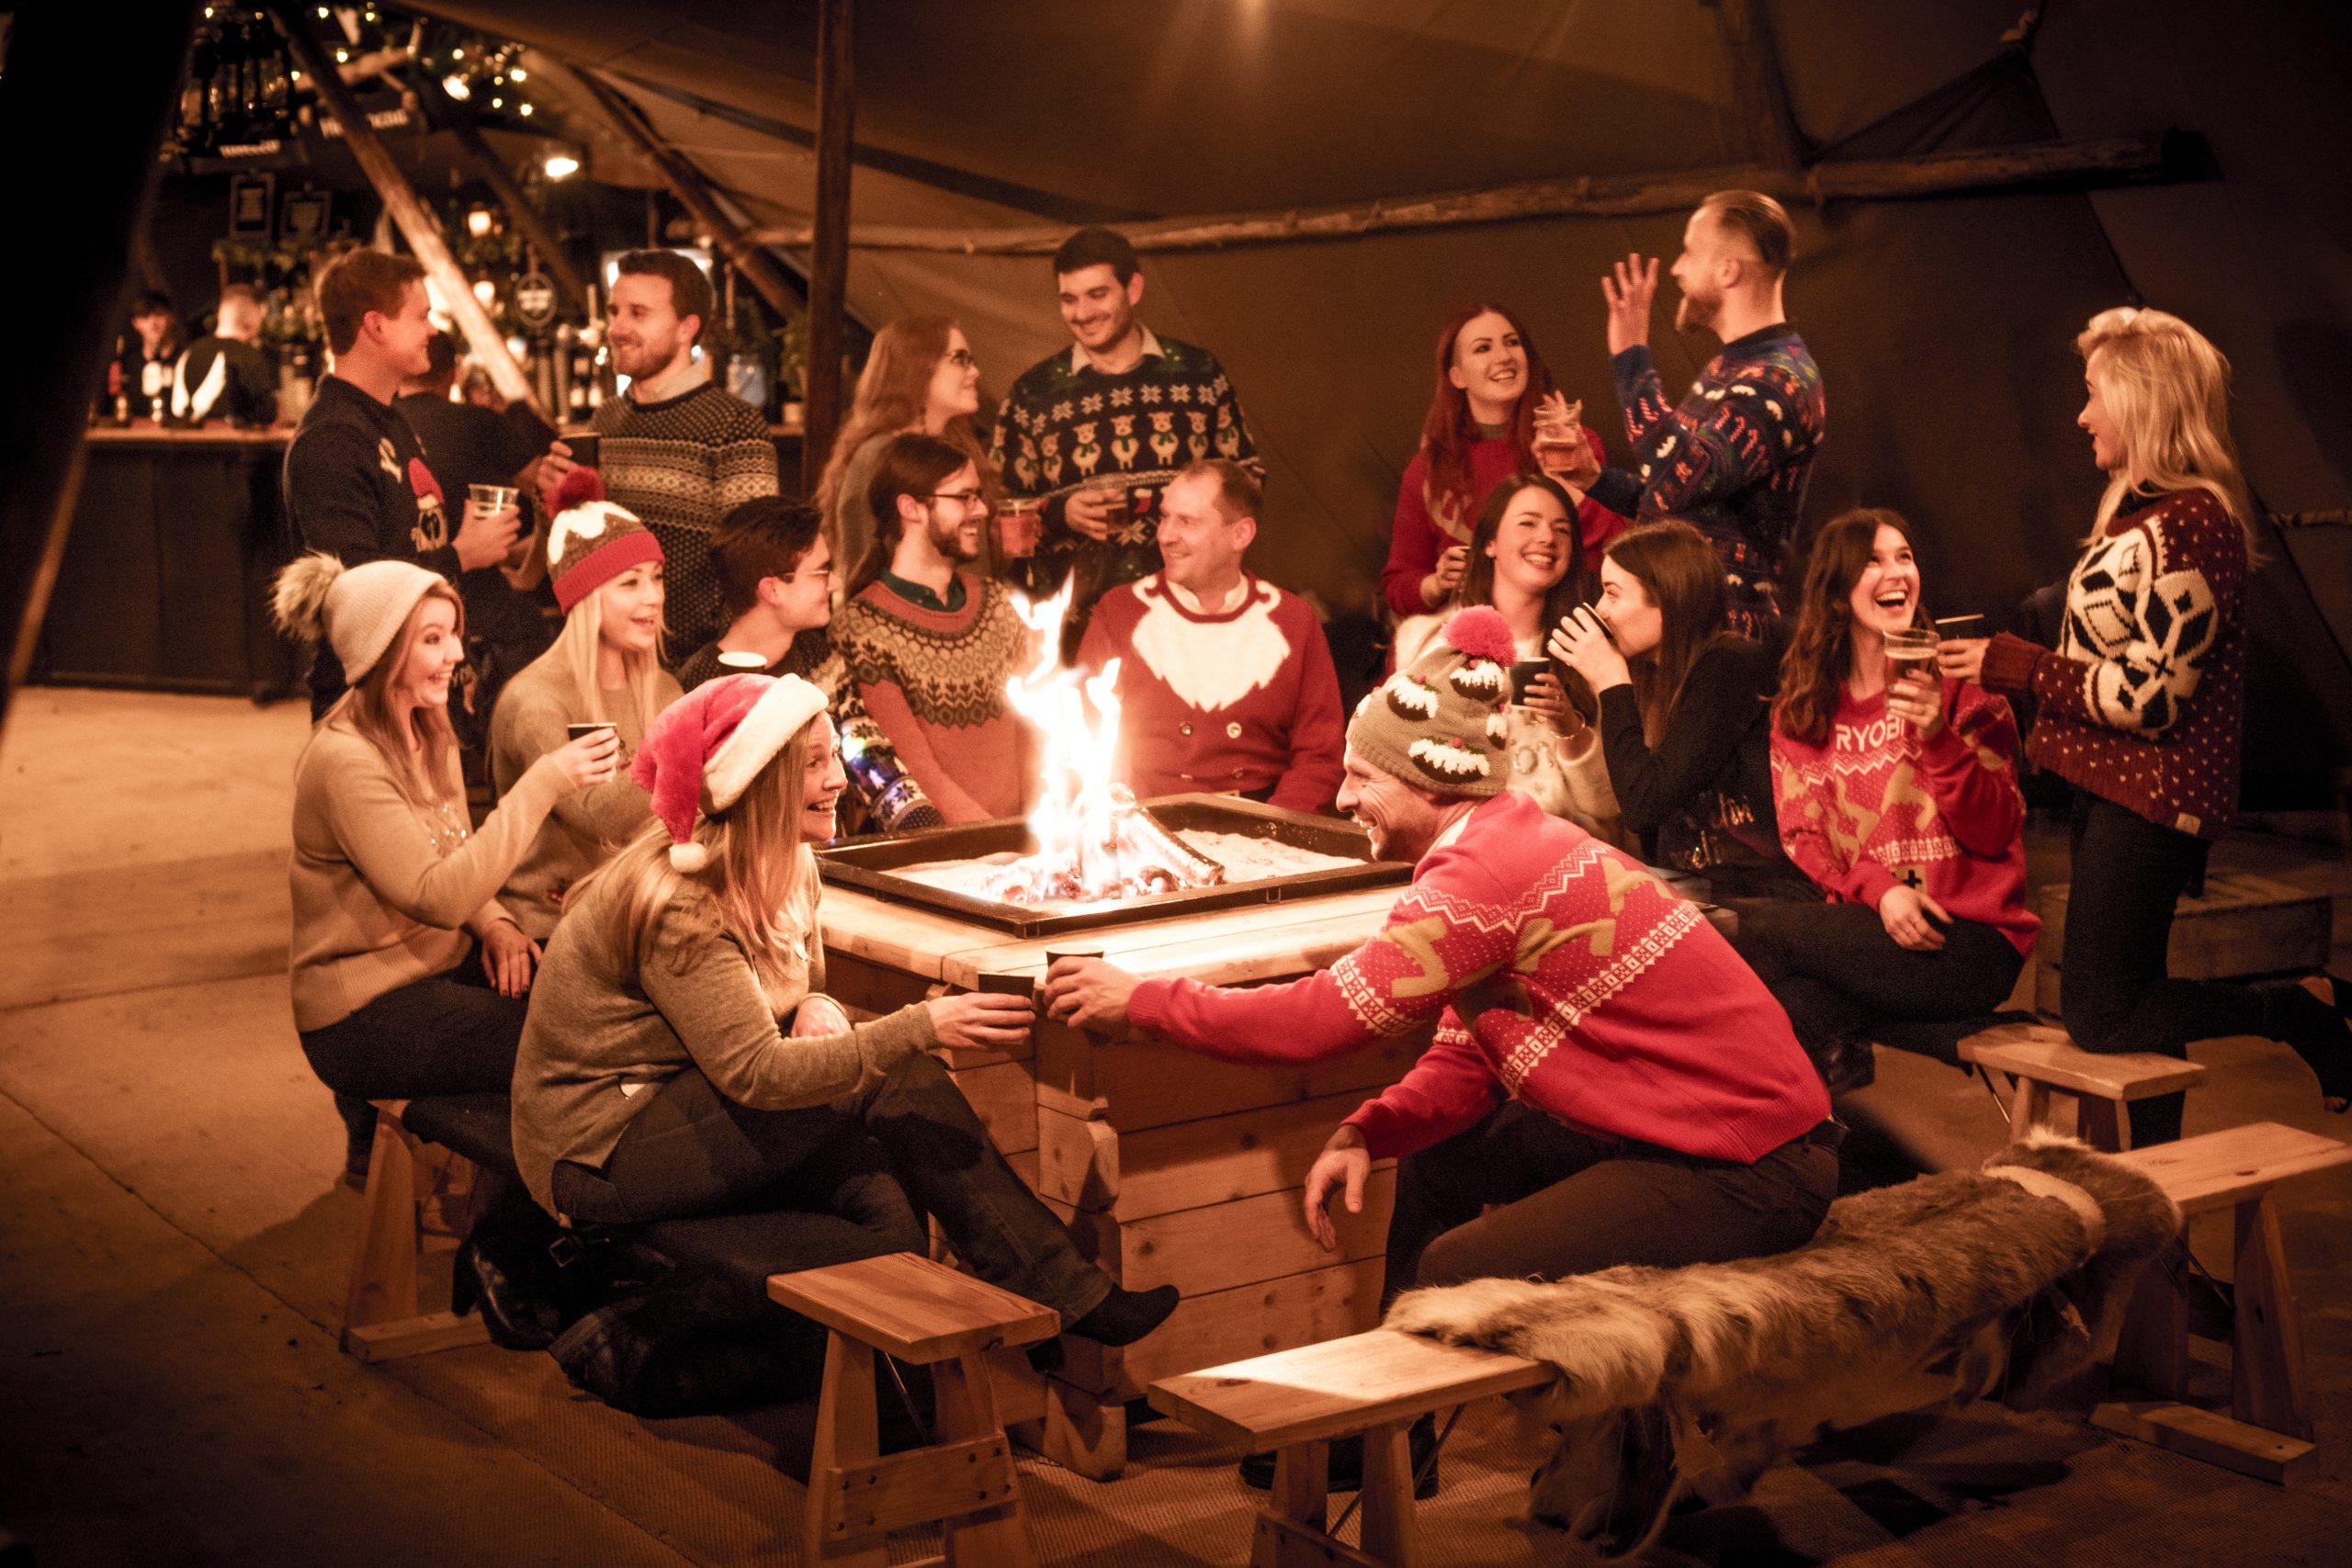 The Staff of We Are Boutique Gathered Around a Fire Wearing Christmas Jumpers 